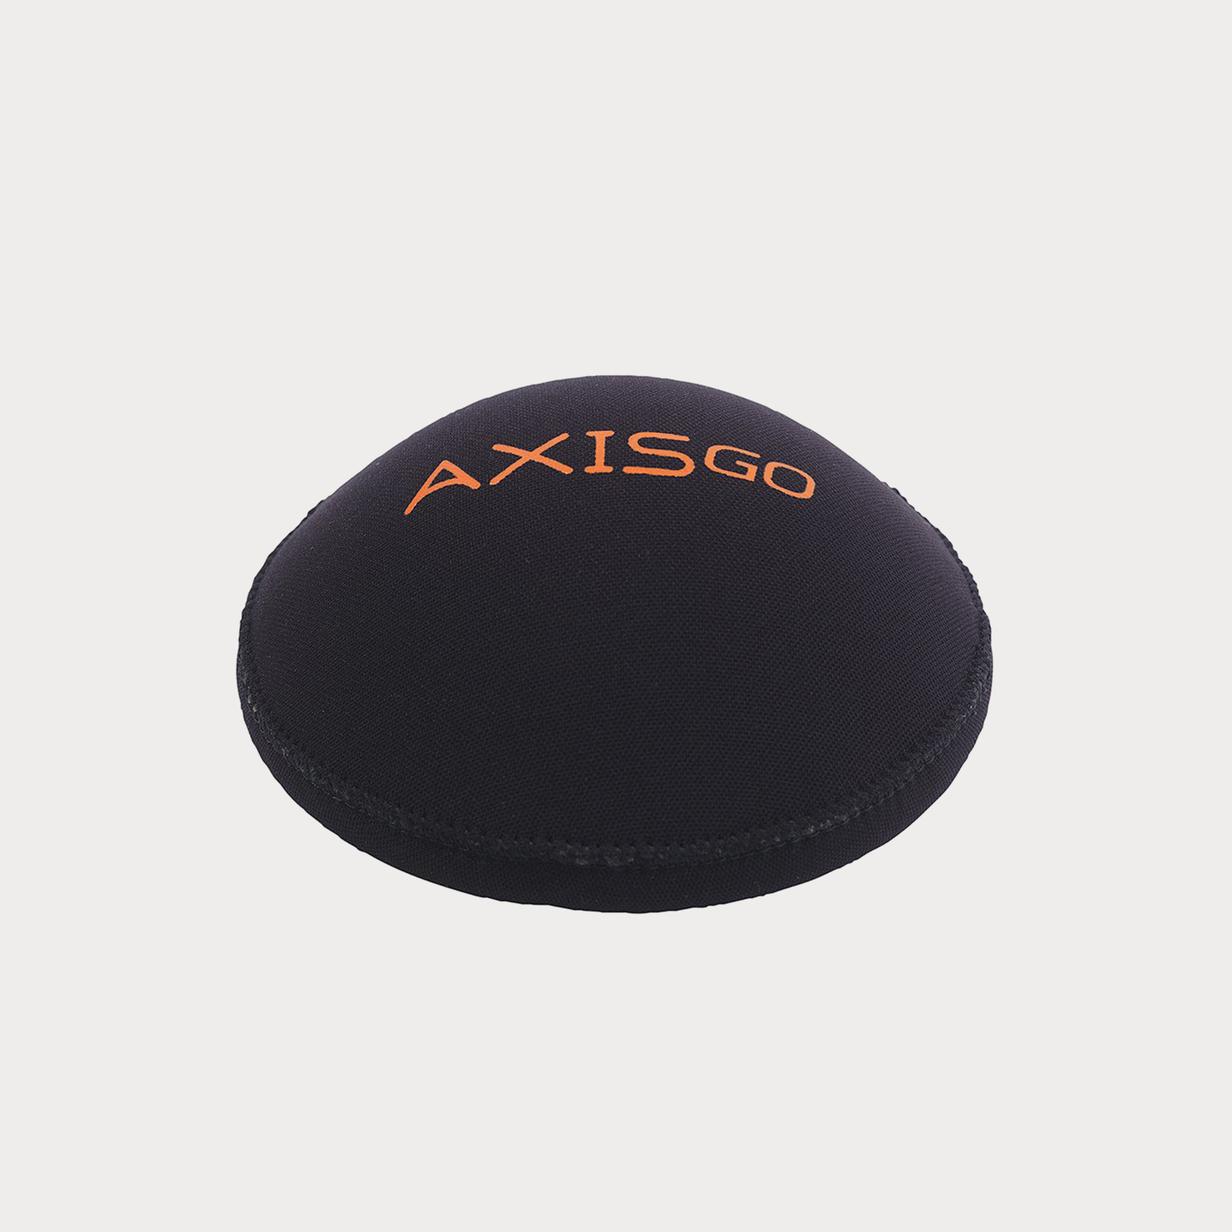 Moment Aquatech 19014 Axis GO Dome Cover 6 01